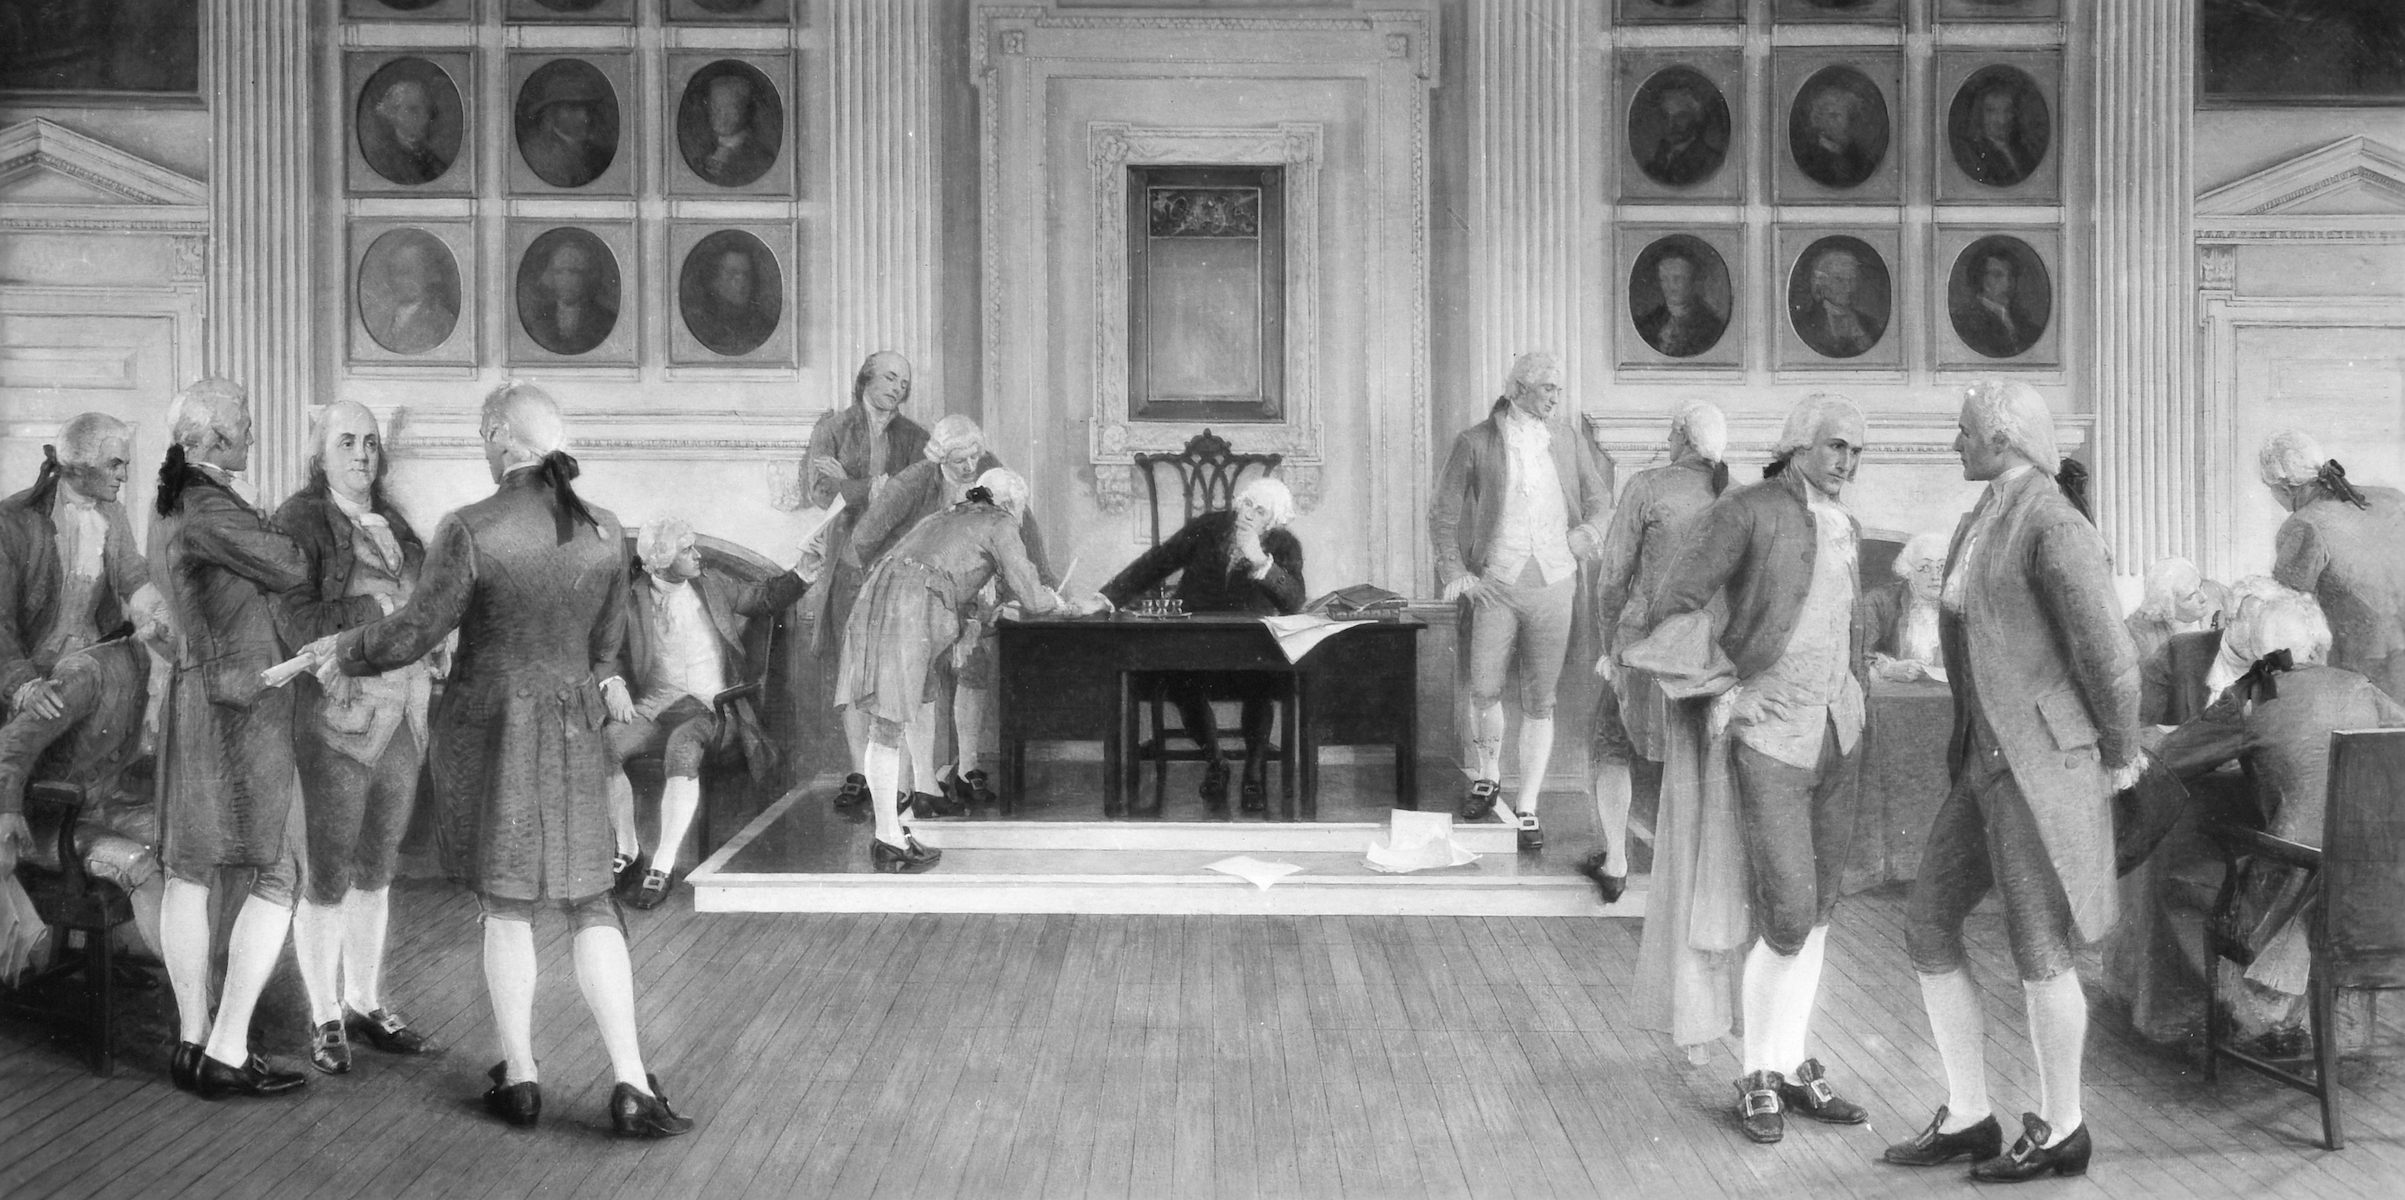 Painting of "The Signing of the American Constitution"